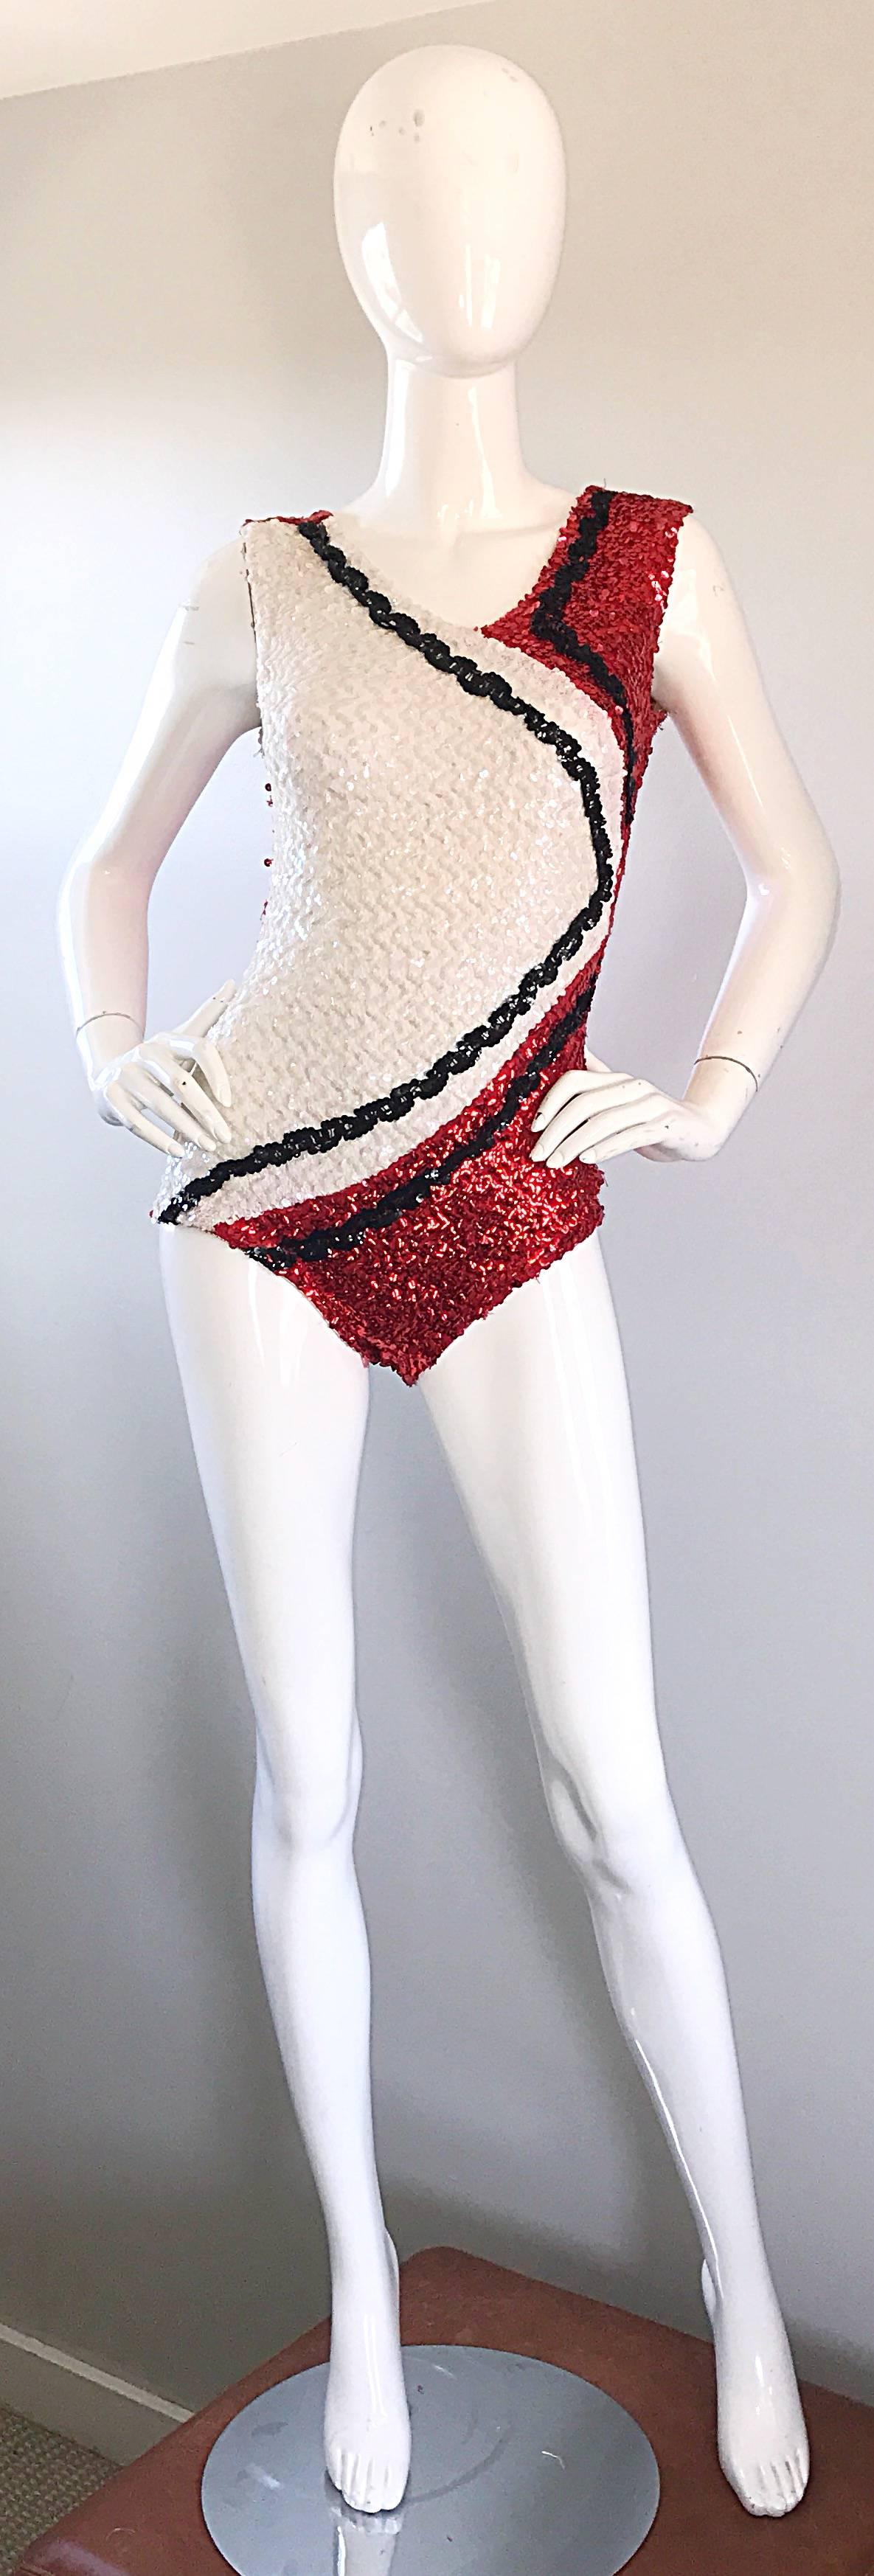 Fabulous super rare vintage 60s majorette knit sequined leotard romper! Features thousands of hand-sewn sequins throughout. Full metal zipper up the back. Great alone, or paired with shorts, jeans, trousers or a skirt. In great condition. Made in